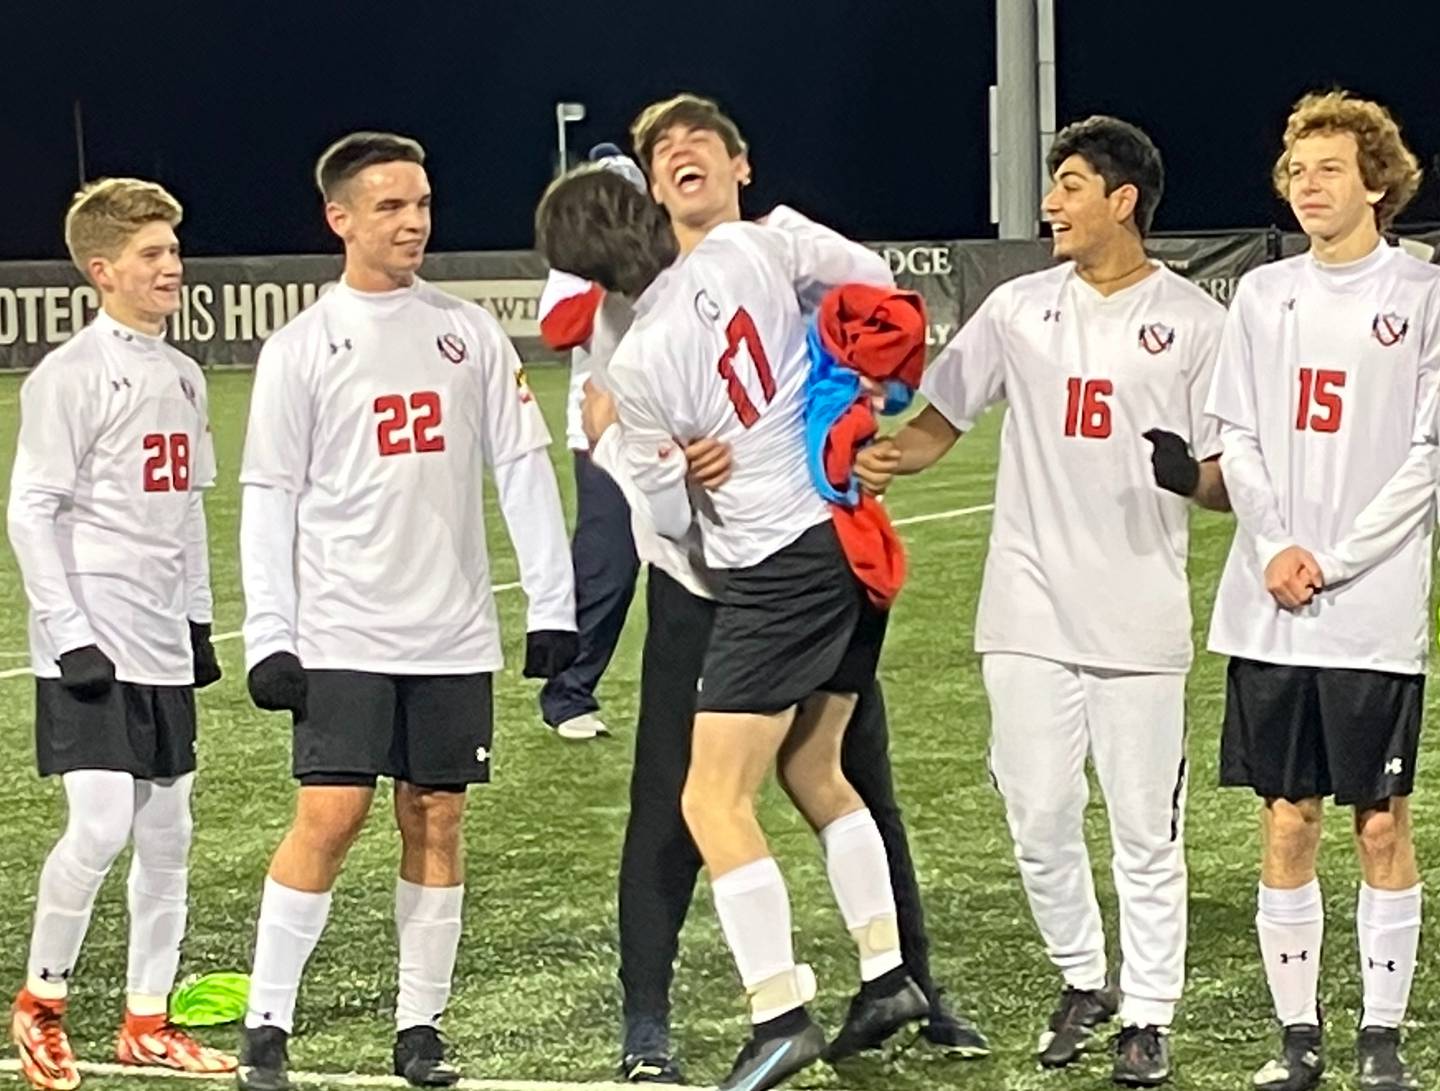 Glenelg soccer celebrates before Friday's Class 2A state championship awards cereromy. The No. 12 Gladiators captured their first title since 1997 with a 2-0 victory over 15th-ranked North Harford at Loyola University's Ridley Athletic Complex in Northwest Baltimore.